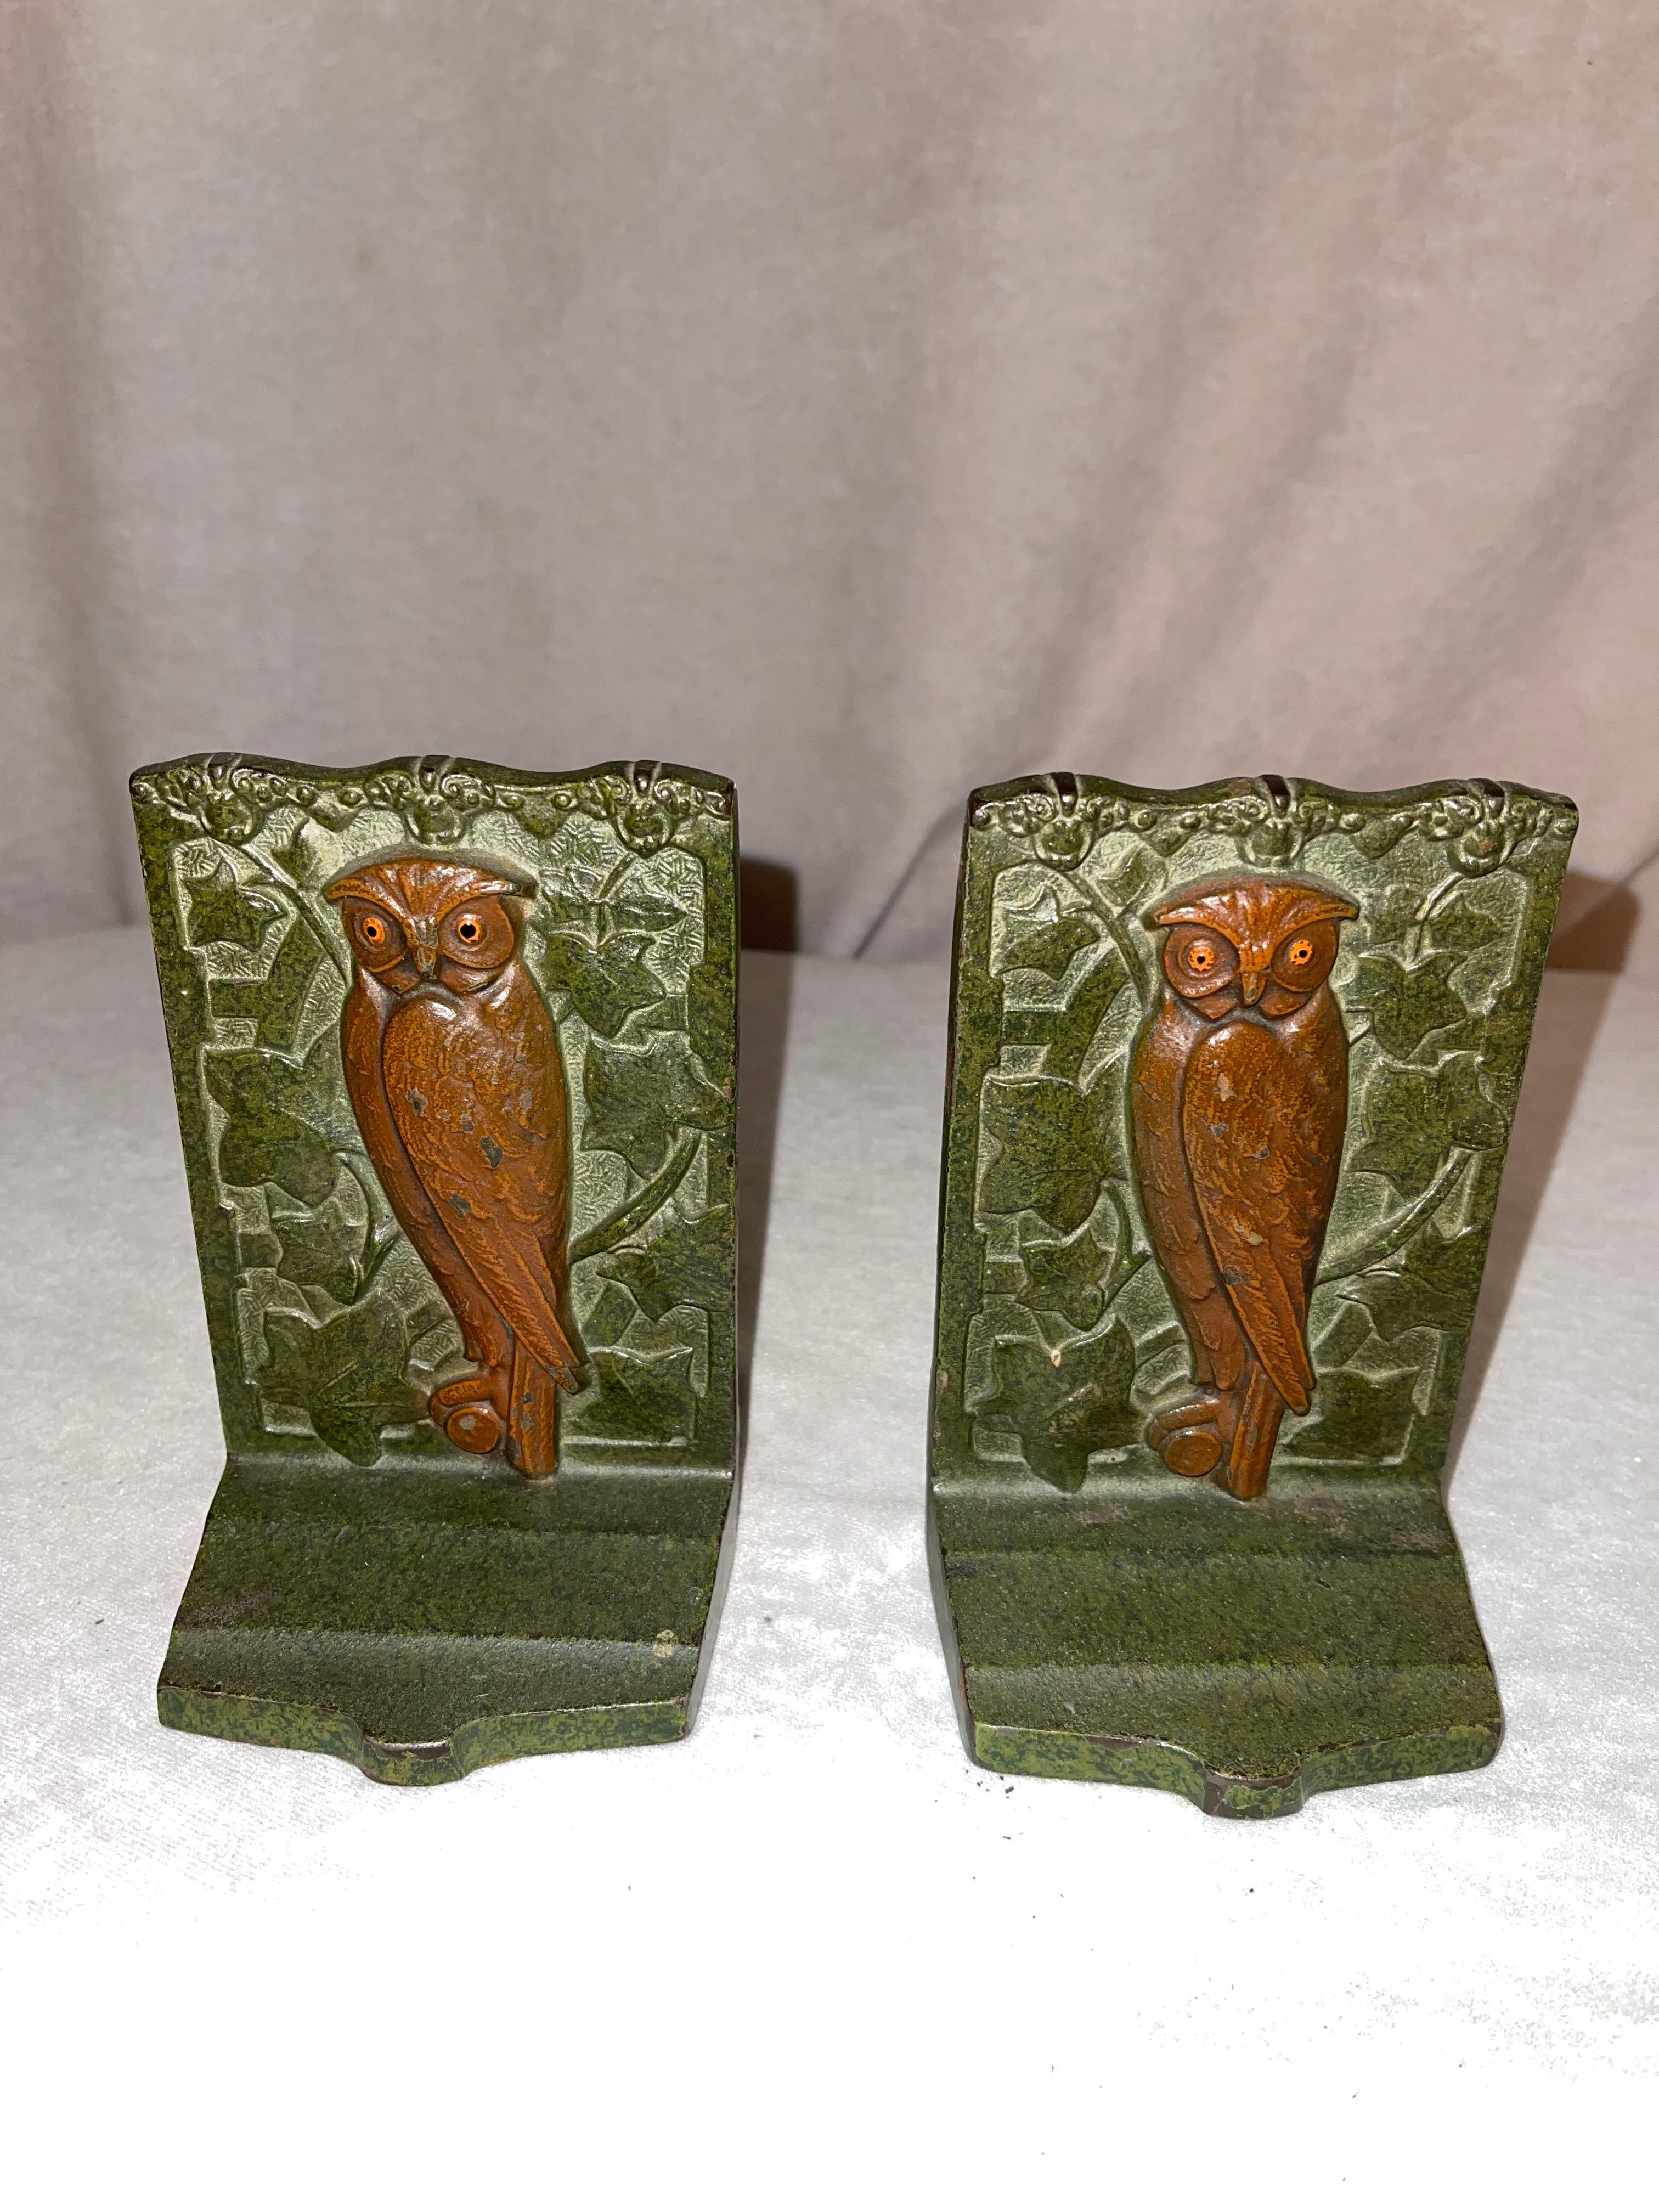 American Pair of Art Nouveau Cast Iron Bookends w/Owls, by the Judd Co. ca 1900